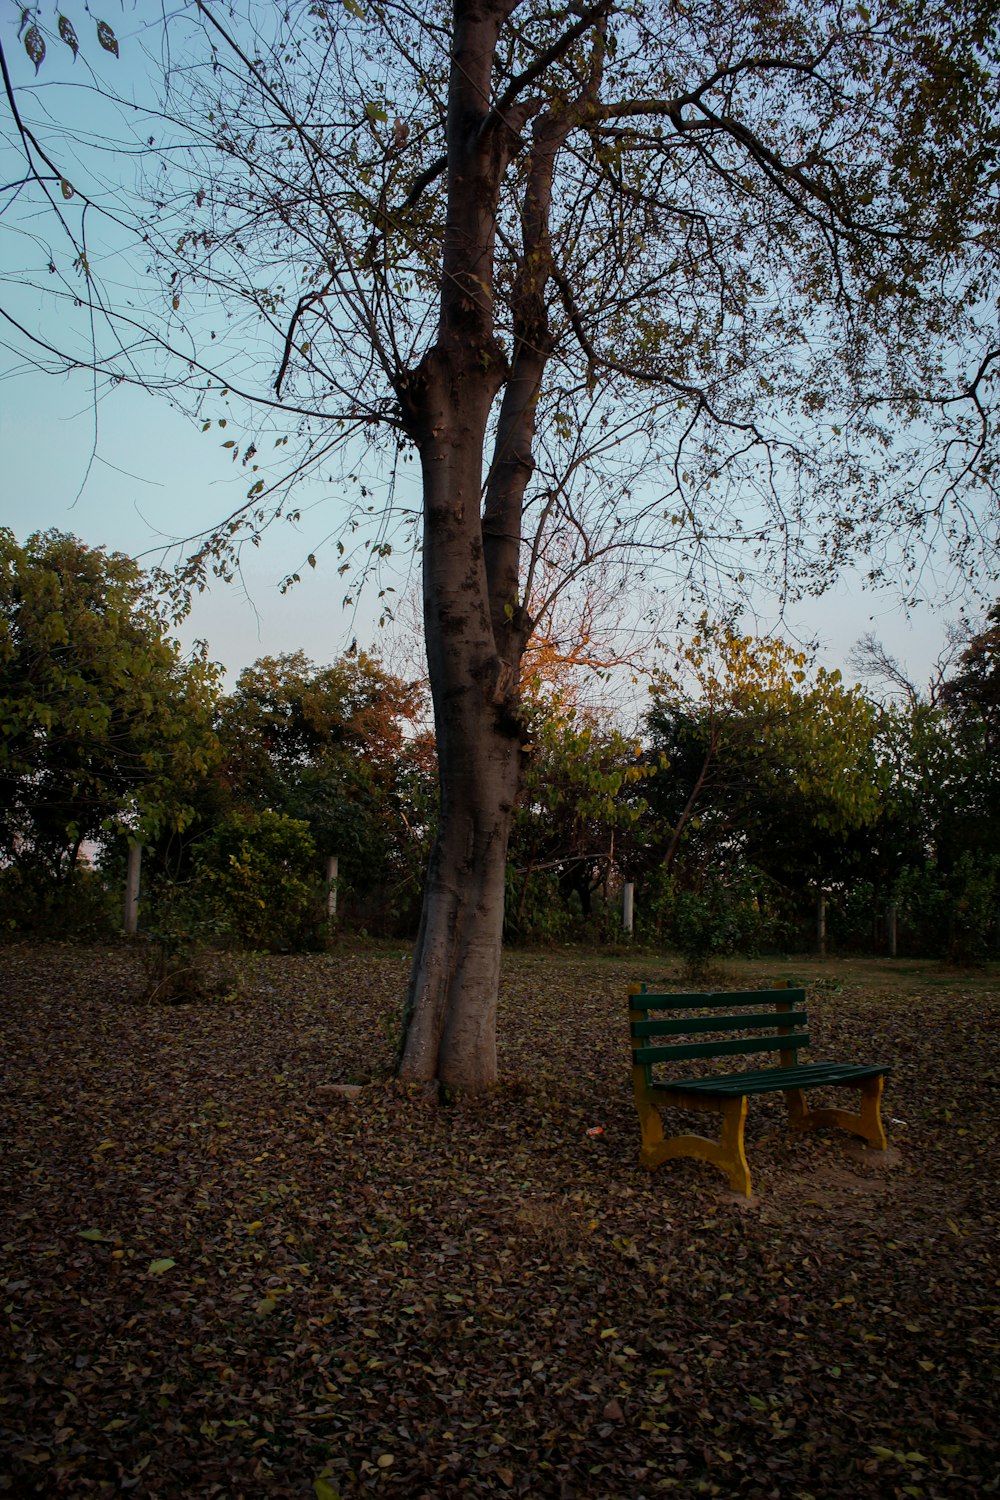 a bench under a tree in a park